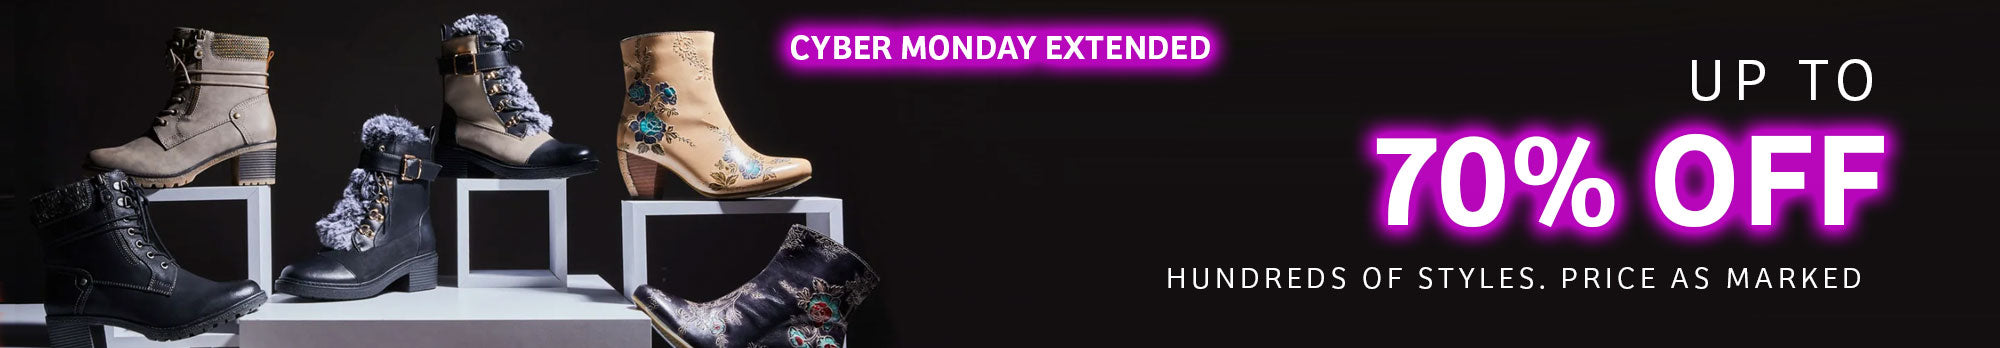 Cyber Monday Sale Extended Banner - Up To 70% Off